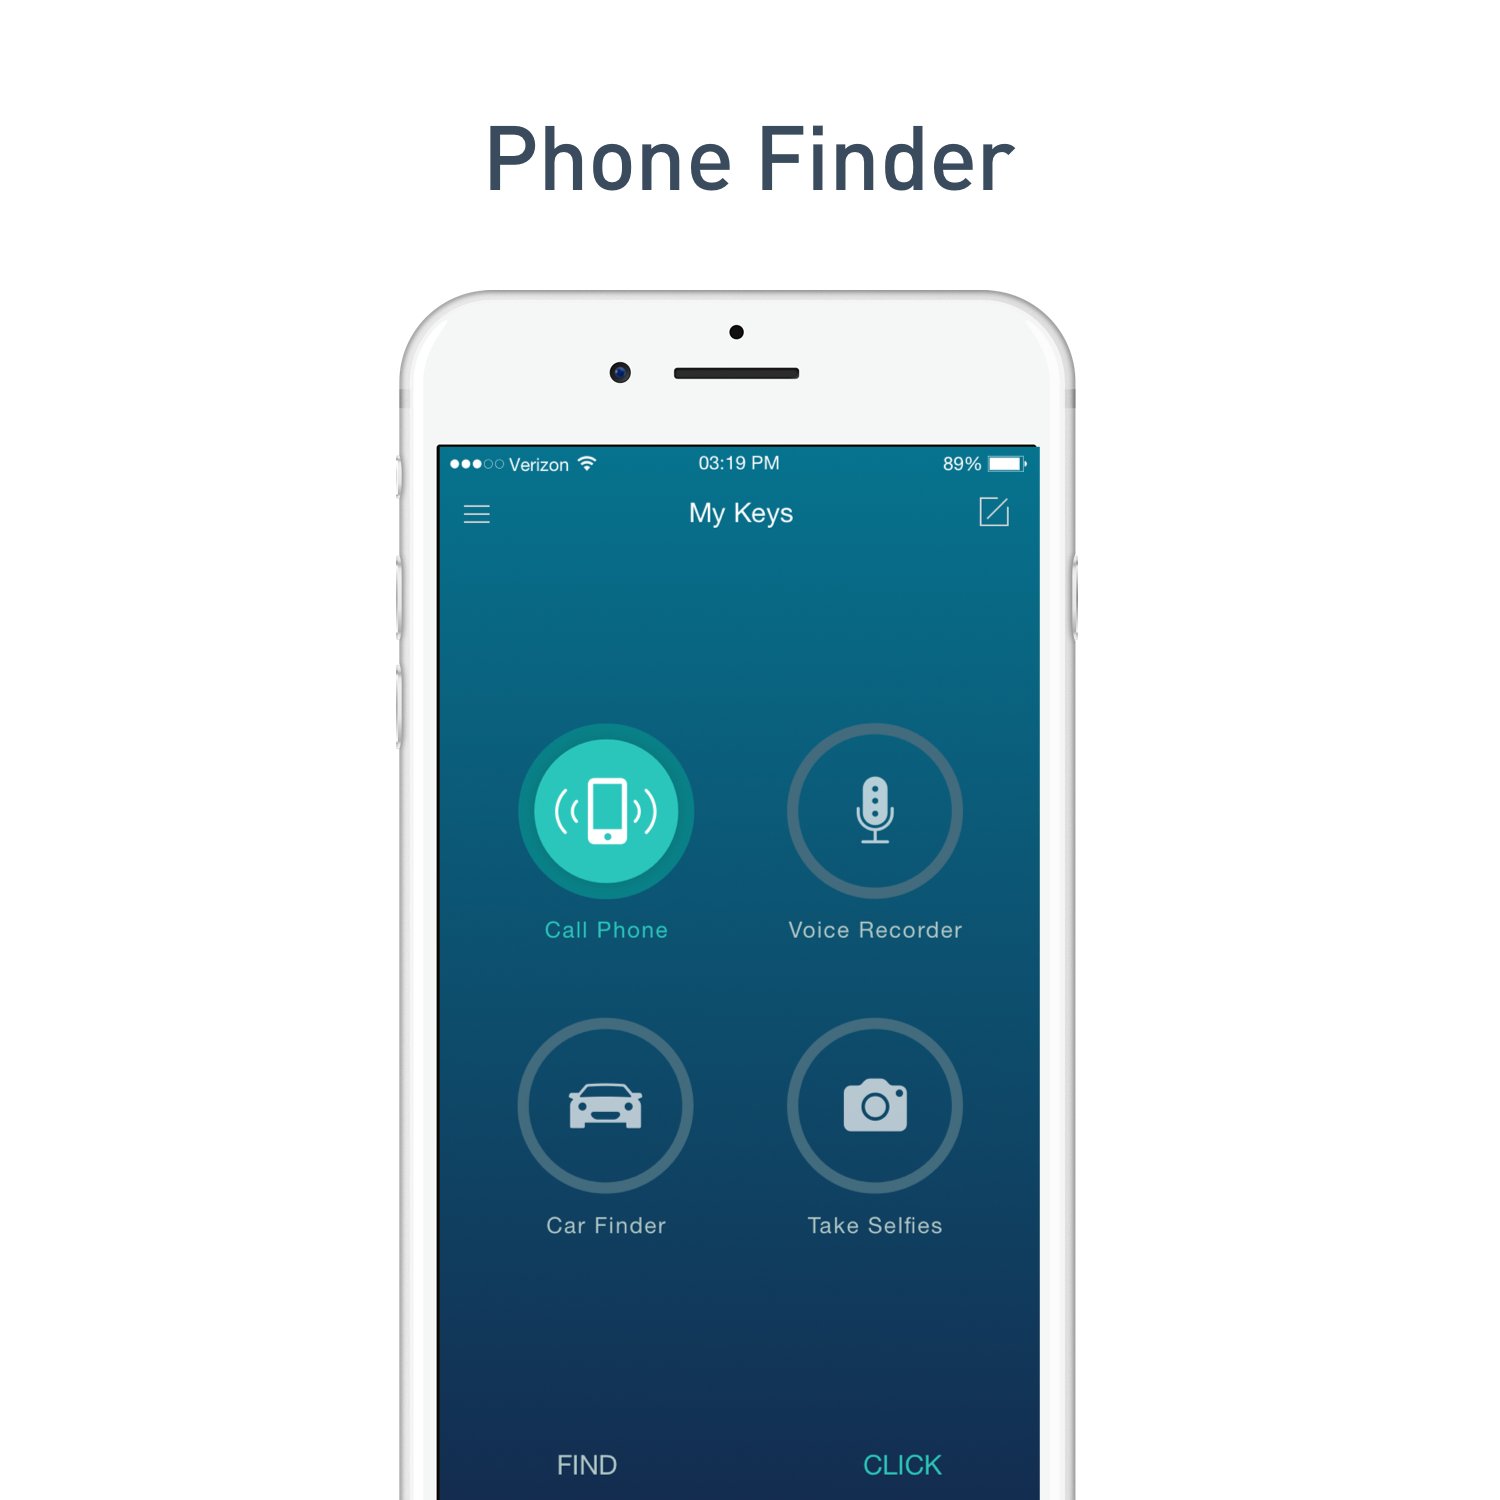 nonda iHere Key Finder, Phone Finder, Car Finder, Selfie Remote and Voice Recording Rechargeable Bluetooth Tracker for iPhone 4S/5/6/6S, iPad, Samsung Galaxy S5/S6/Note 4 and More (Gen 2)